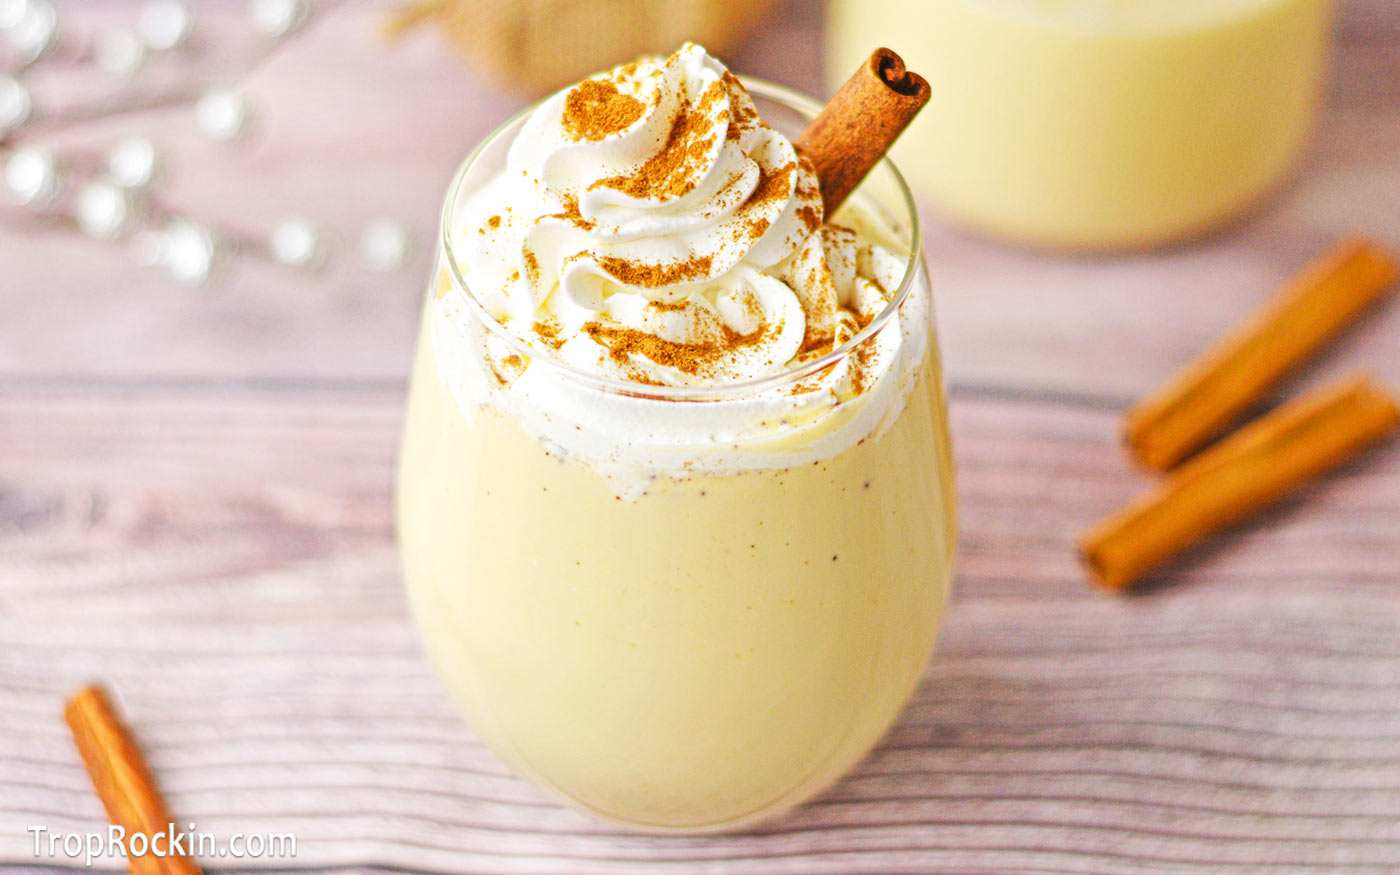 Glass of homemade eggnog garnished with a cinnamon stick, whipped cream and ground nutmeg.